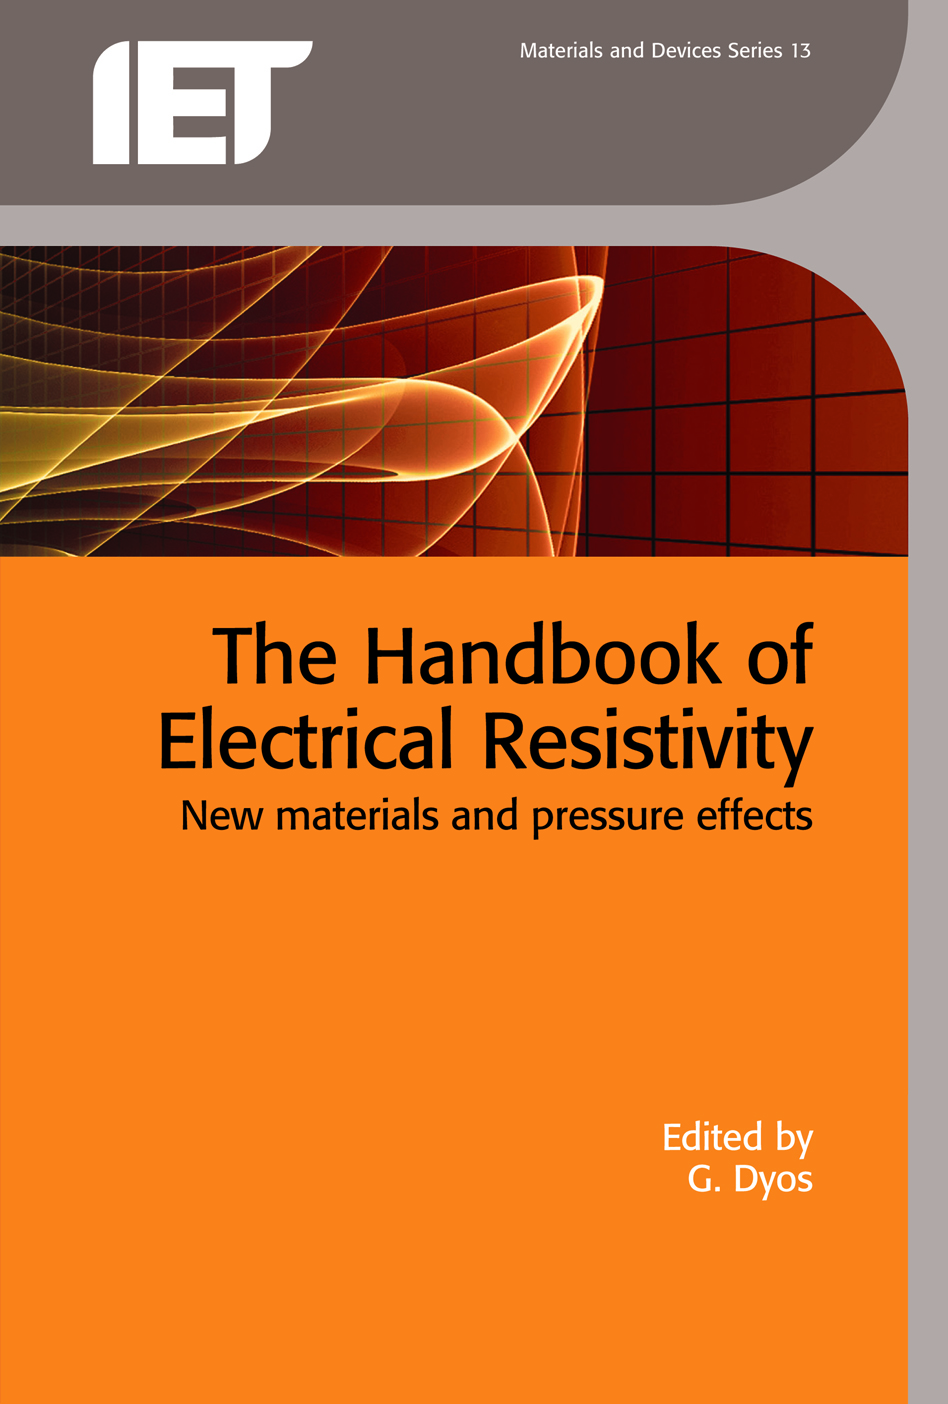 The Handbook of Electrical Resistivity, New materials and pressure effects